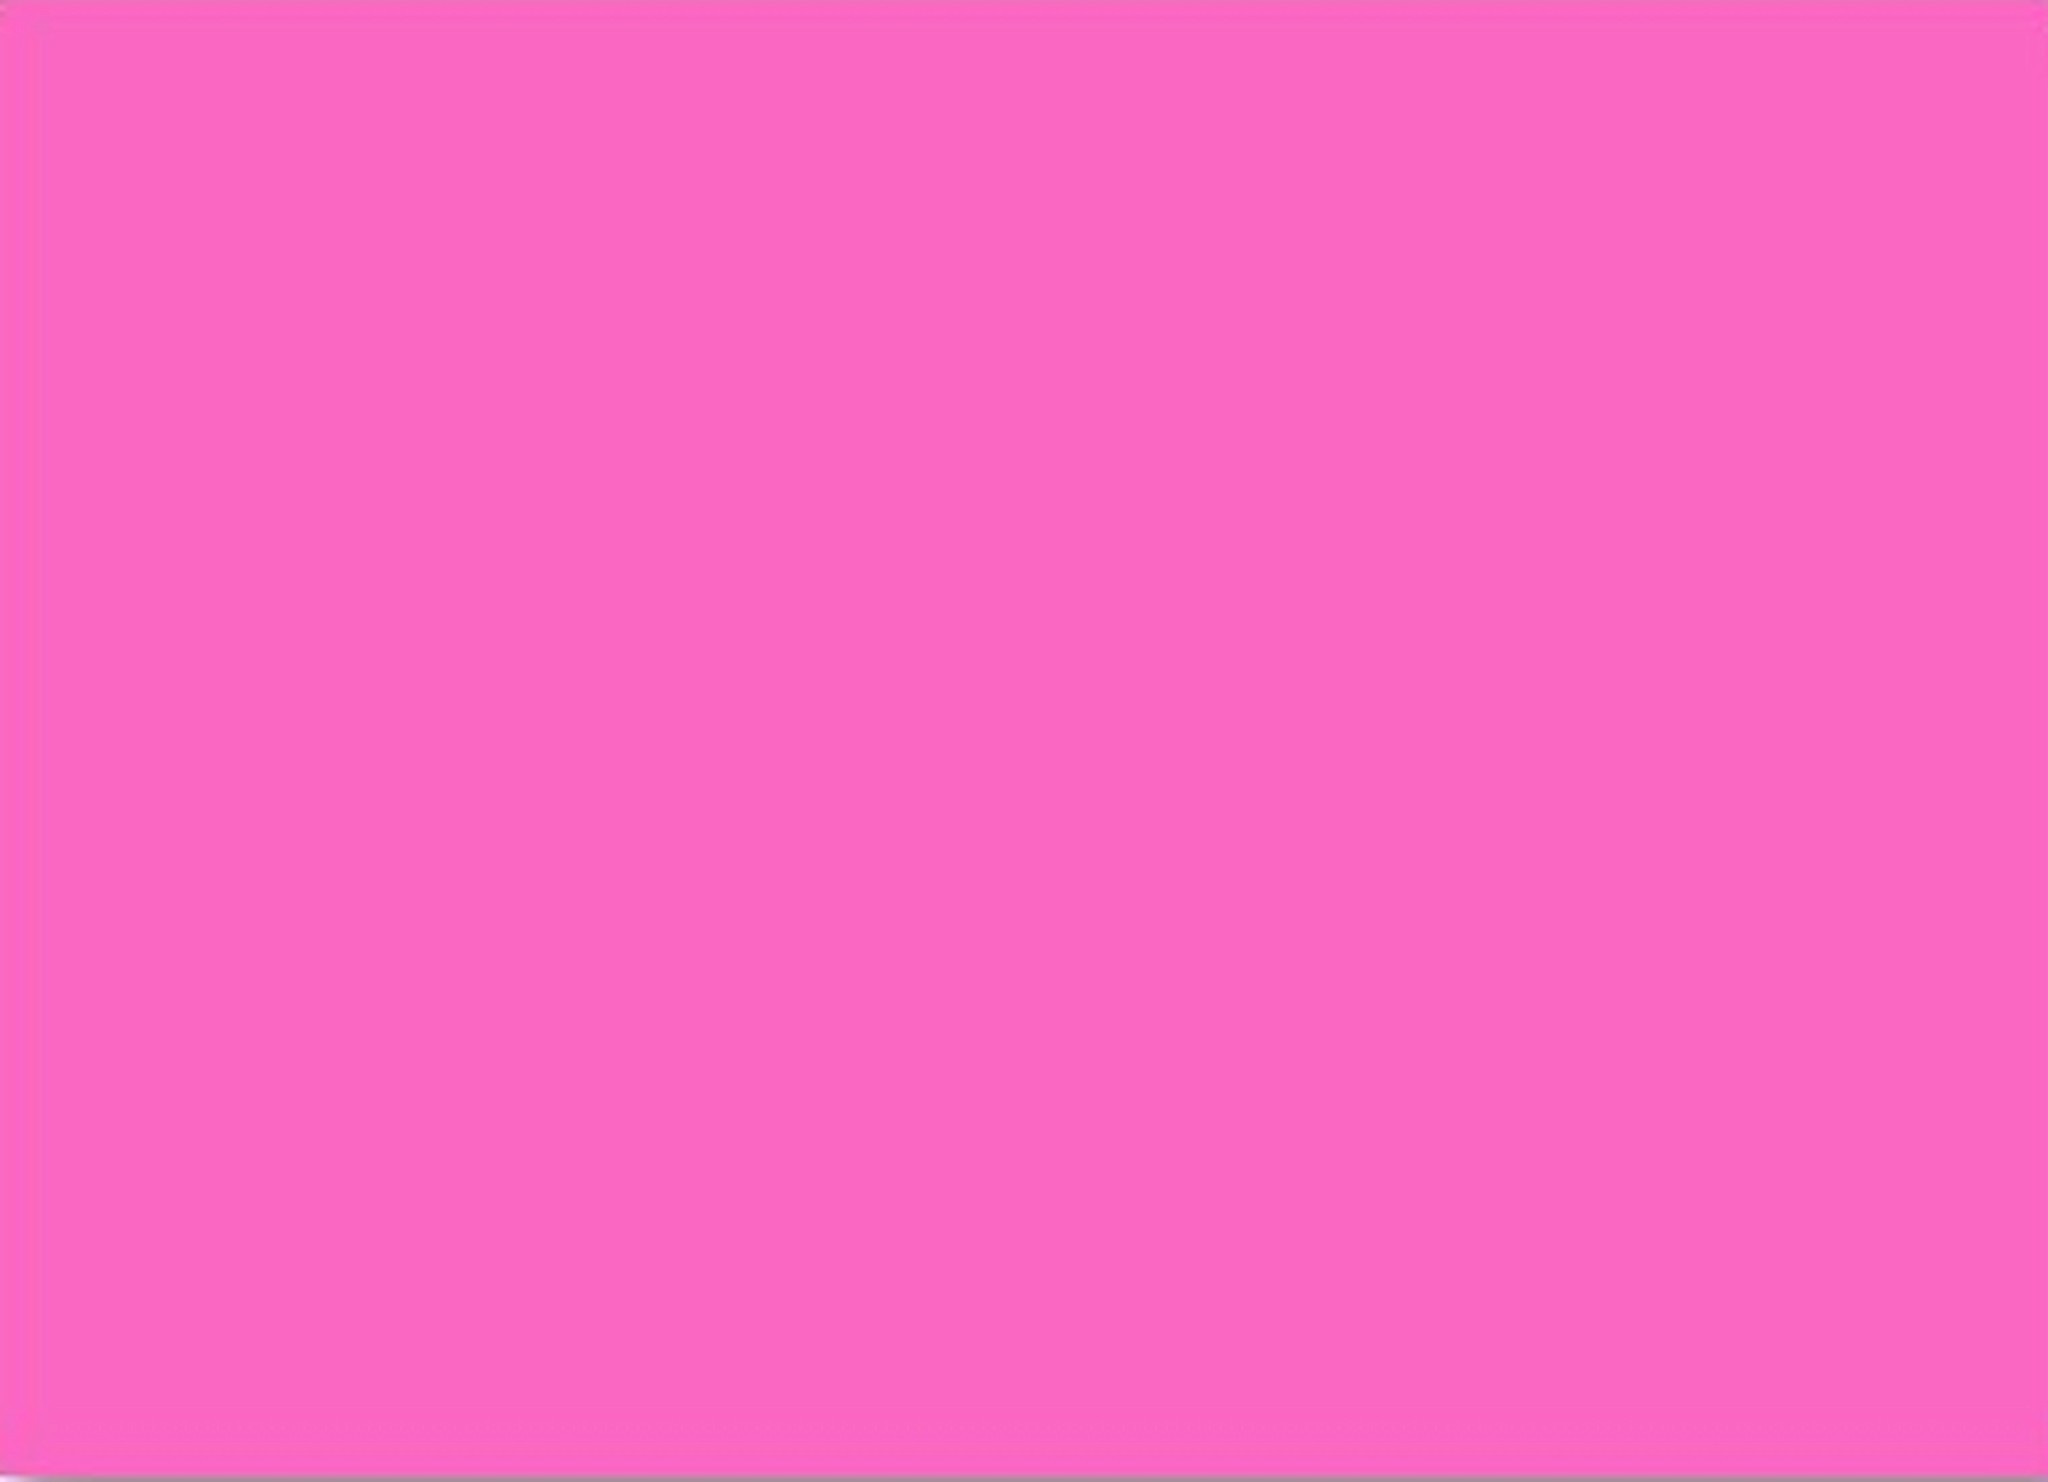 Plain Hot Pink Color Background Image Amp Pictures Becuo